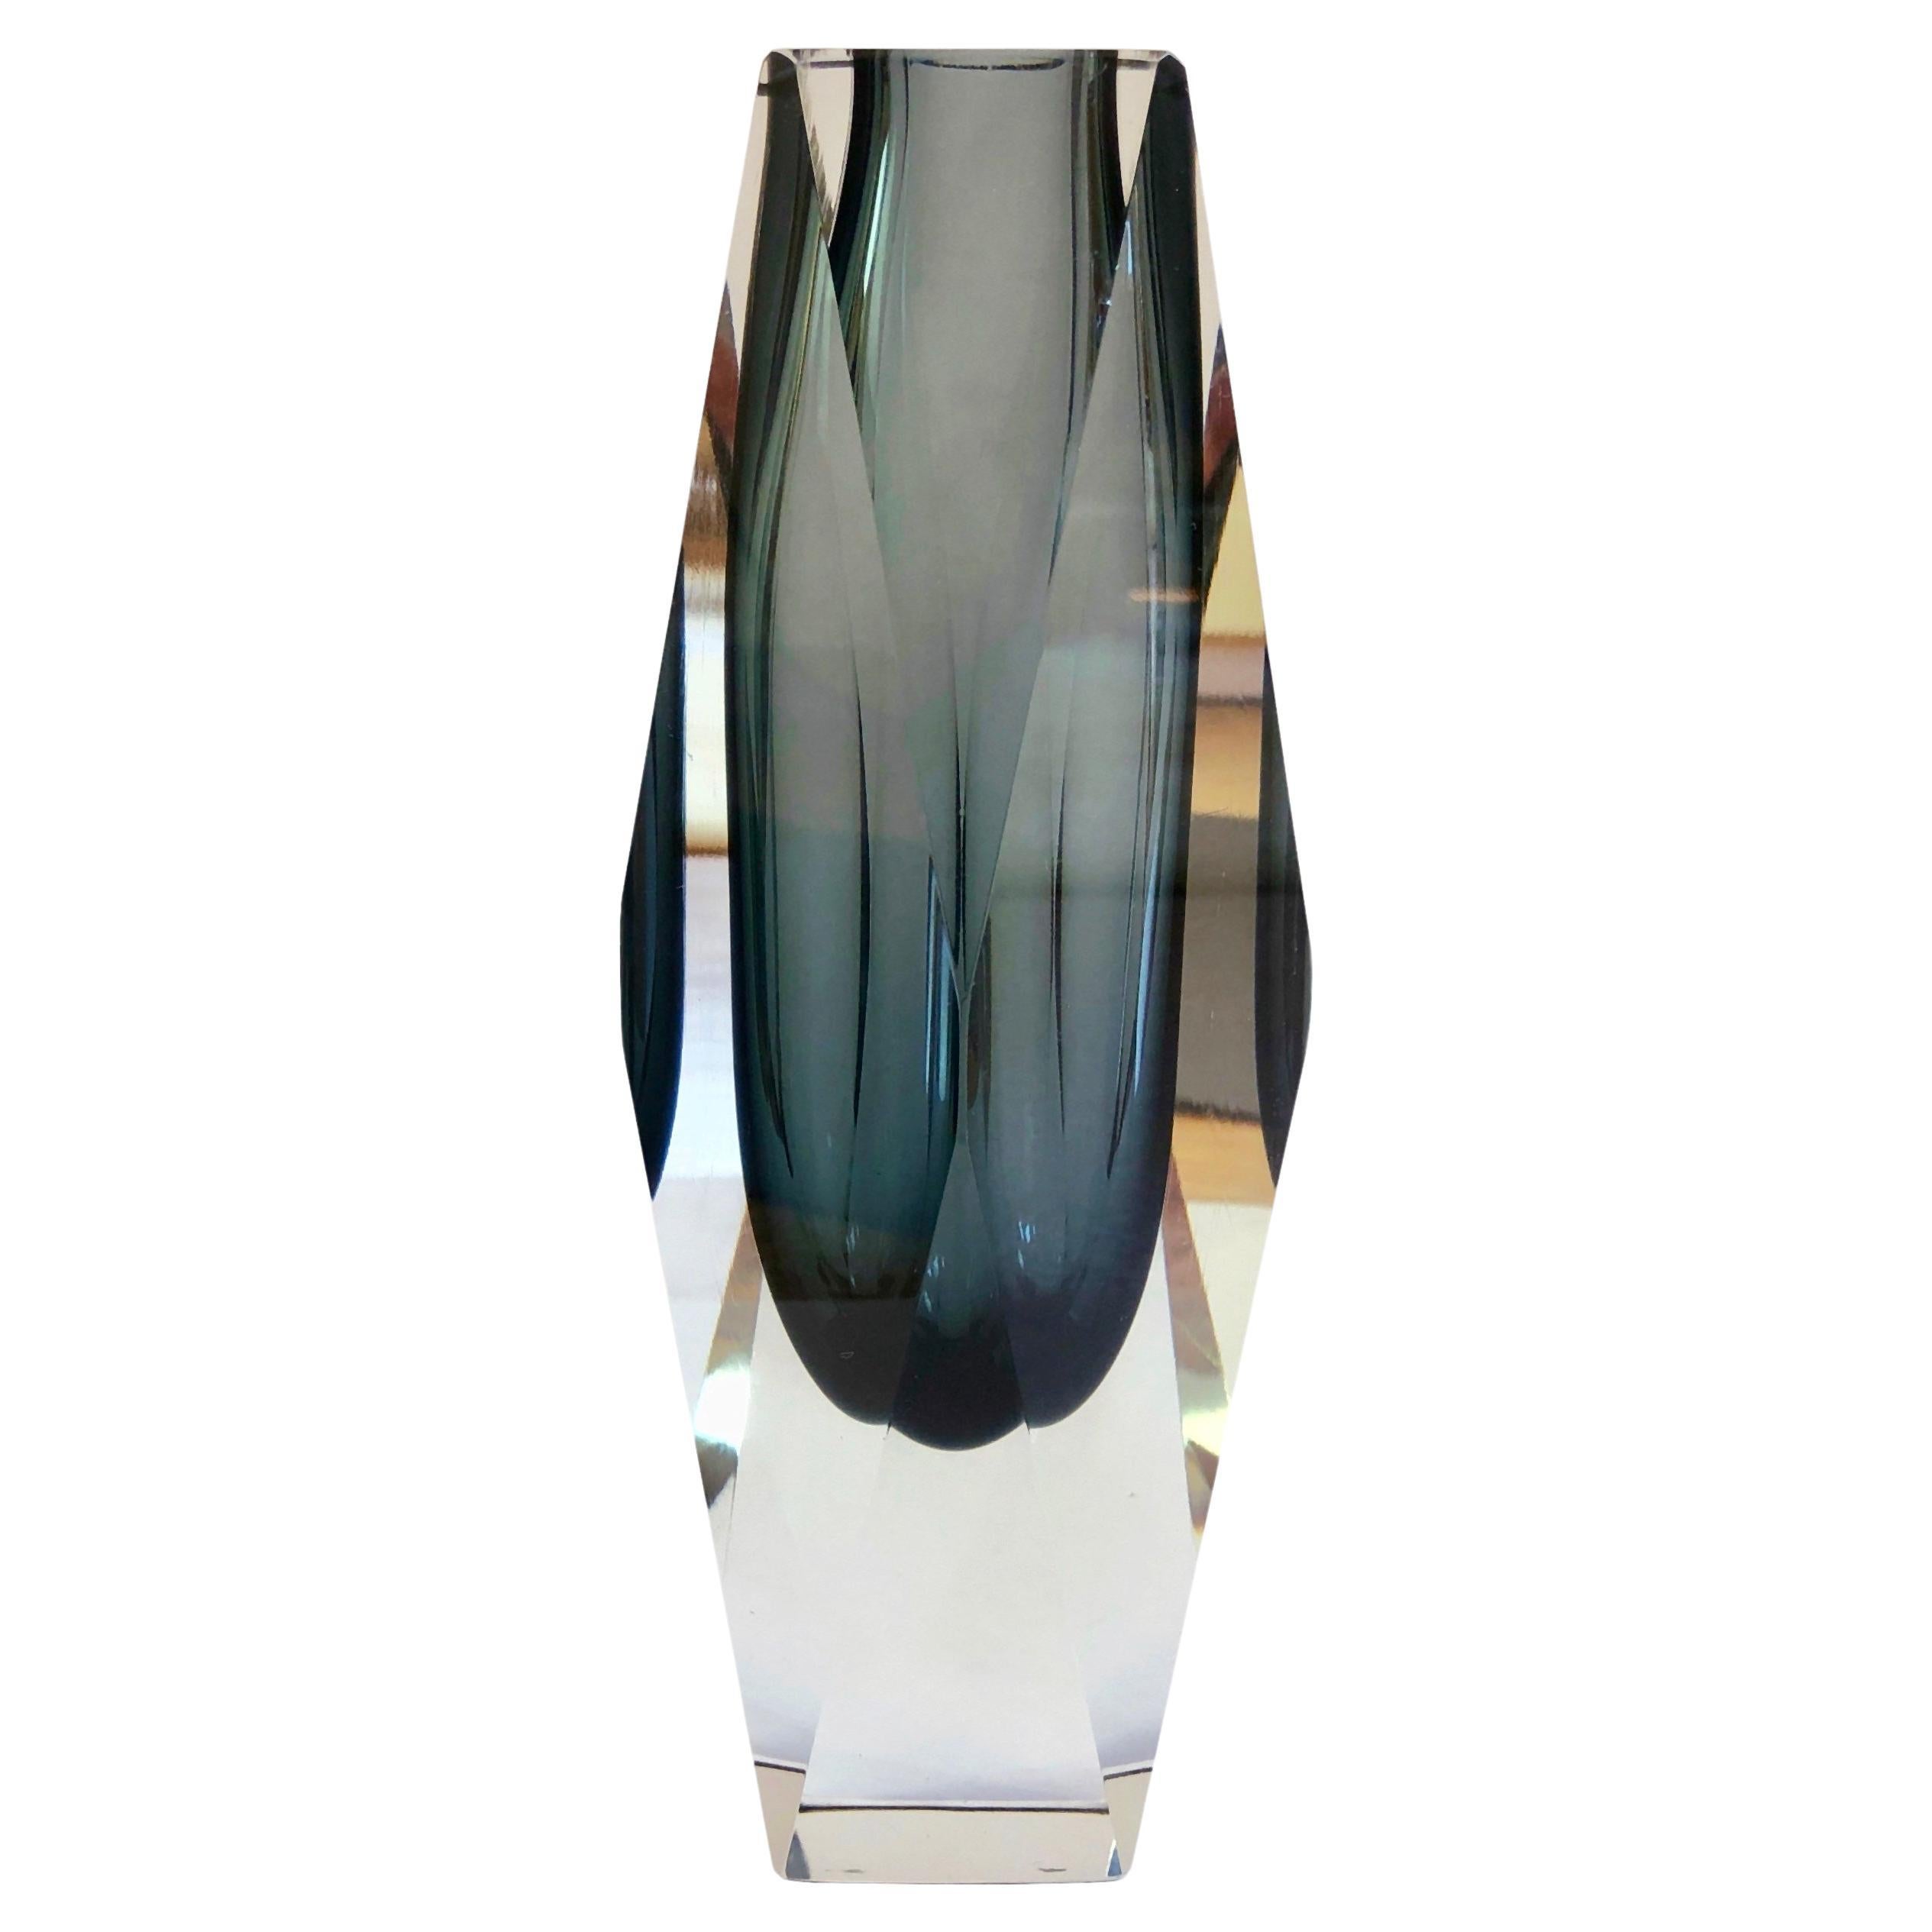 Large Mandruzzato Murano Sommerso Smoked Grey Clear Faceted Art Glass Vase